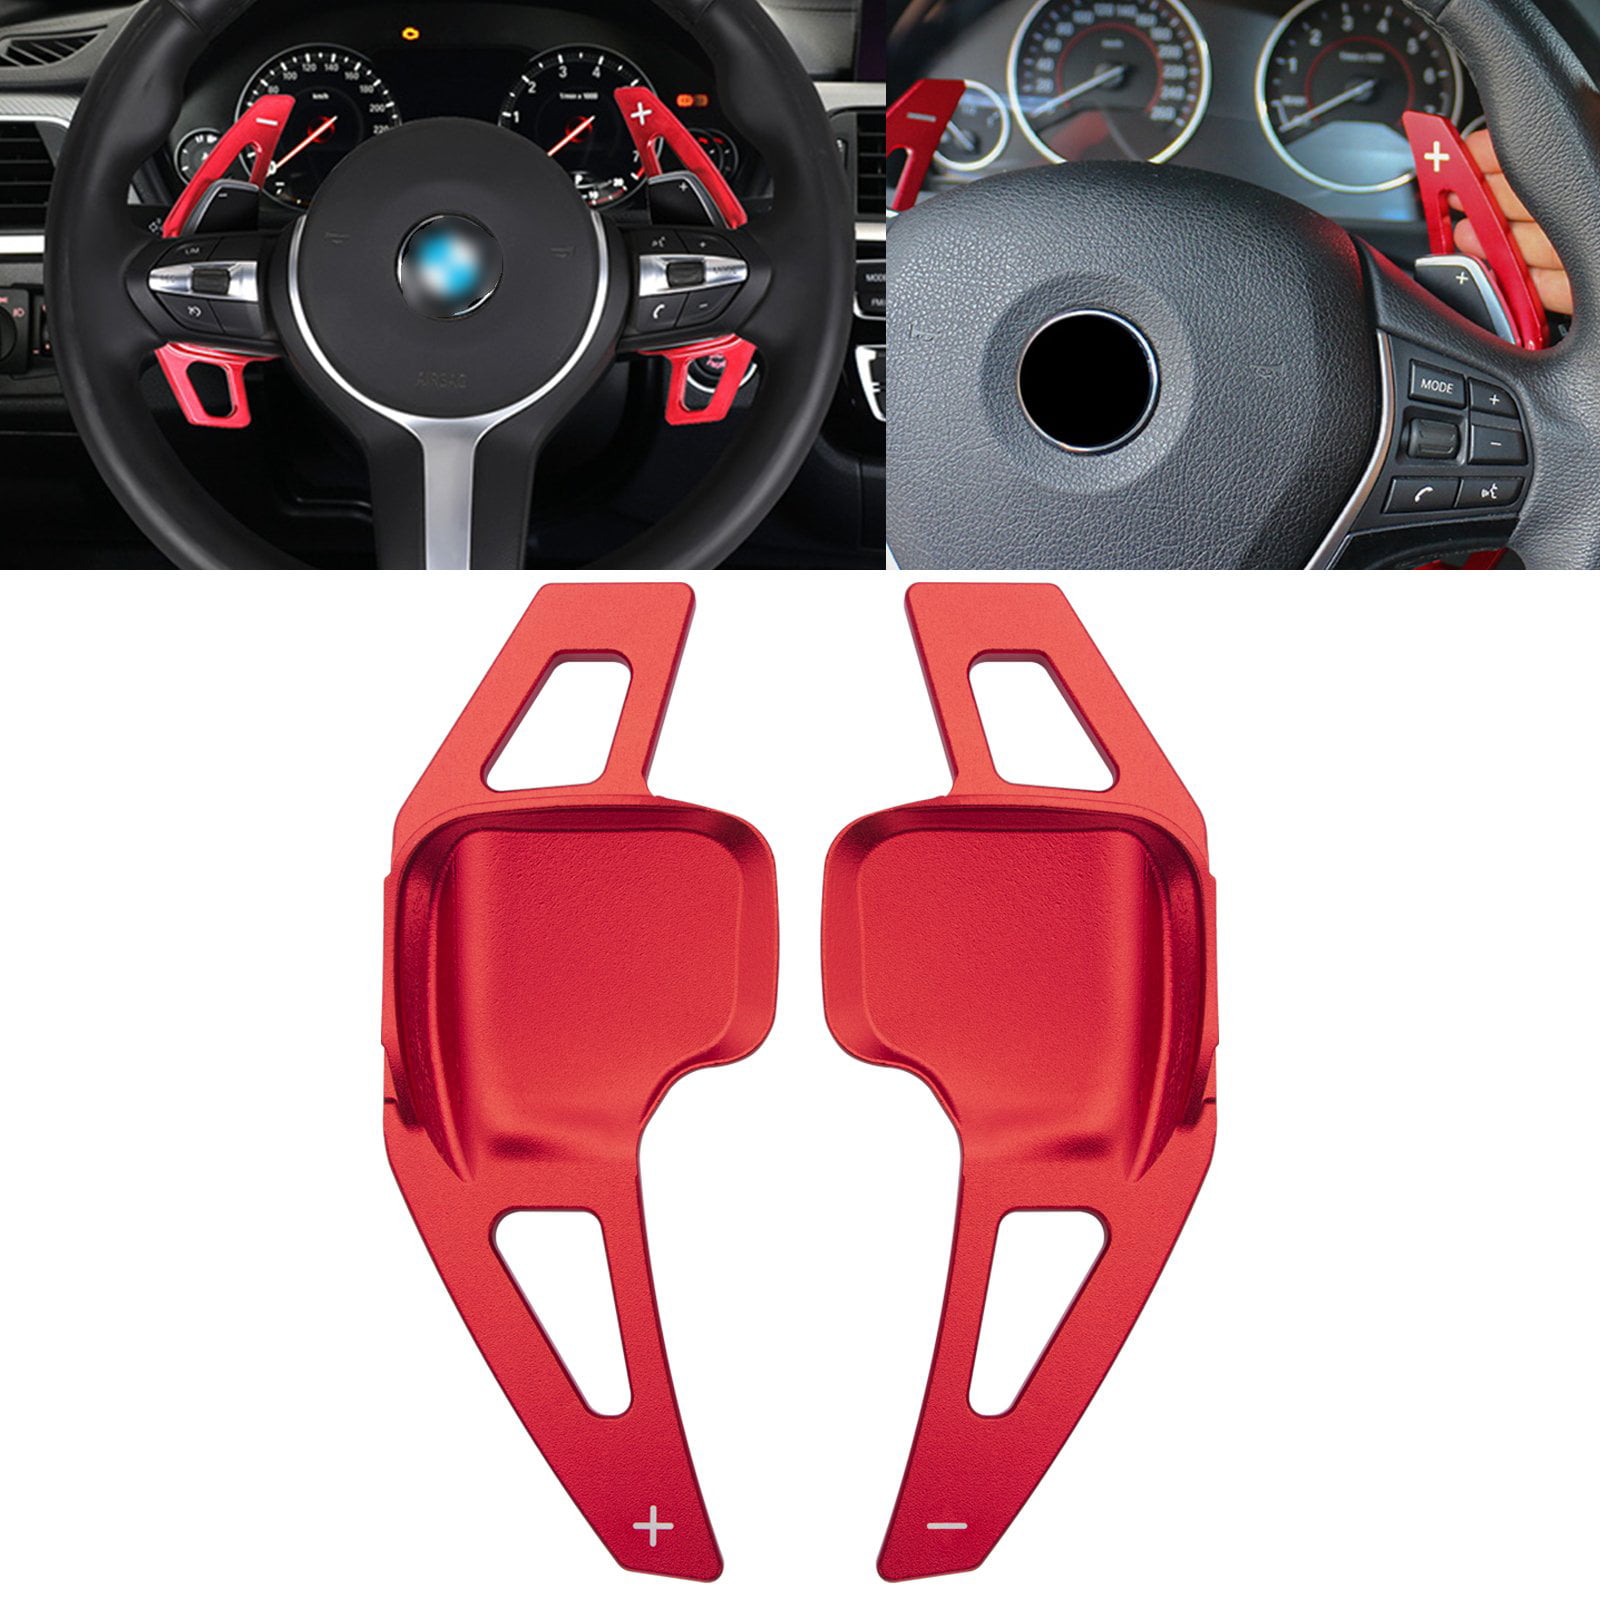 Fits: BMW 2 3 4 X1 X2 X3 X4 X5 X6 series,F22 F23 F30 F31 F33 F34 F36 F32 F15 F16 F25 F26 F48 F42 Aluminum Metal Steering Wheel Paddle Shifter For BMW Paddle Shifter Extensions 